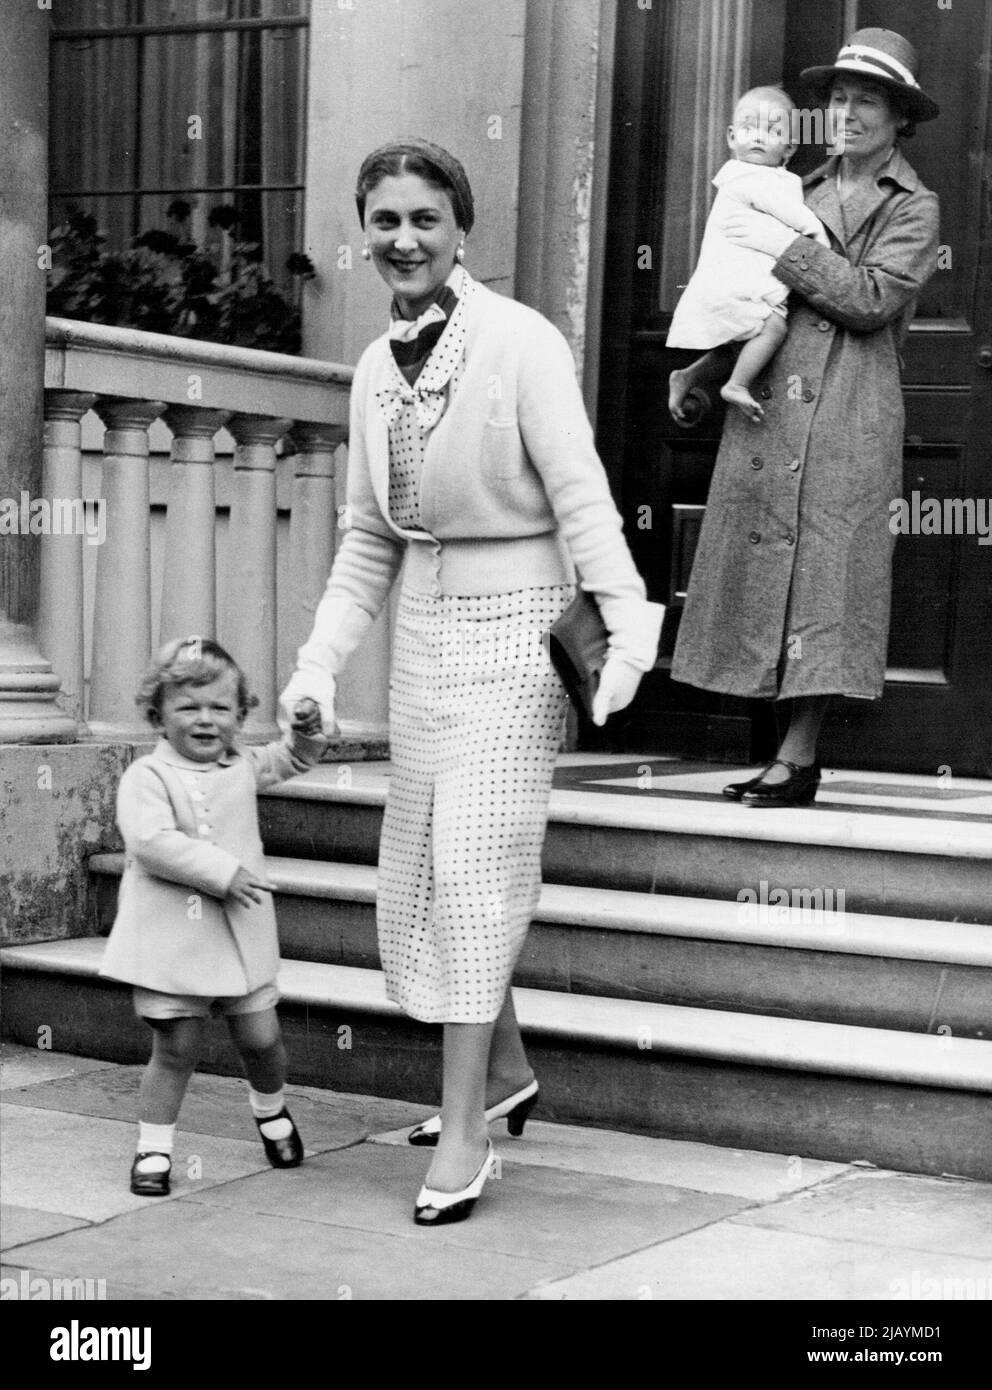 Royal Children Leave For Holiday -- The Duchess of Kent holding Prince Edward's arm, being followed by her baby daughter, Princess Alexandra, leaving Belgrave Square, London, this afternoon. The Duchess of Kent, accompanied by her children, left London this afternoon for a holiday at Sandwich. July 26, 1937. (Photo by Topical Press). Stock Photo